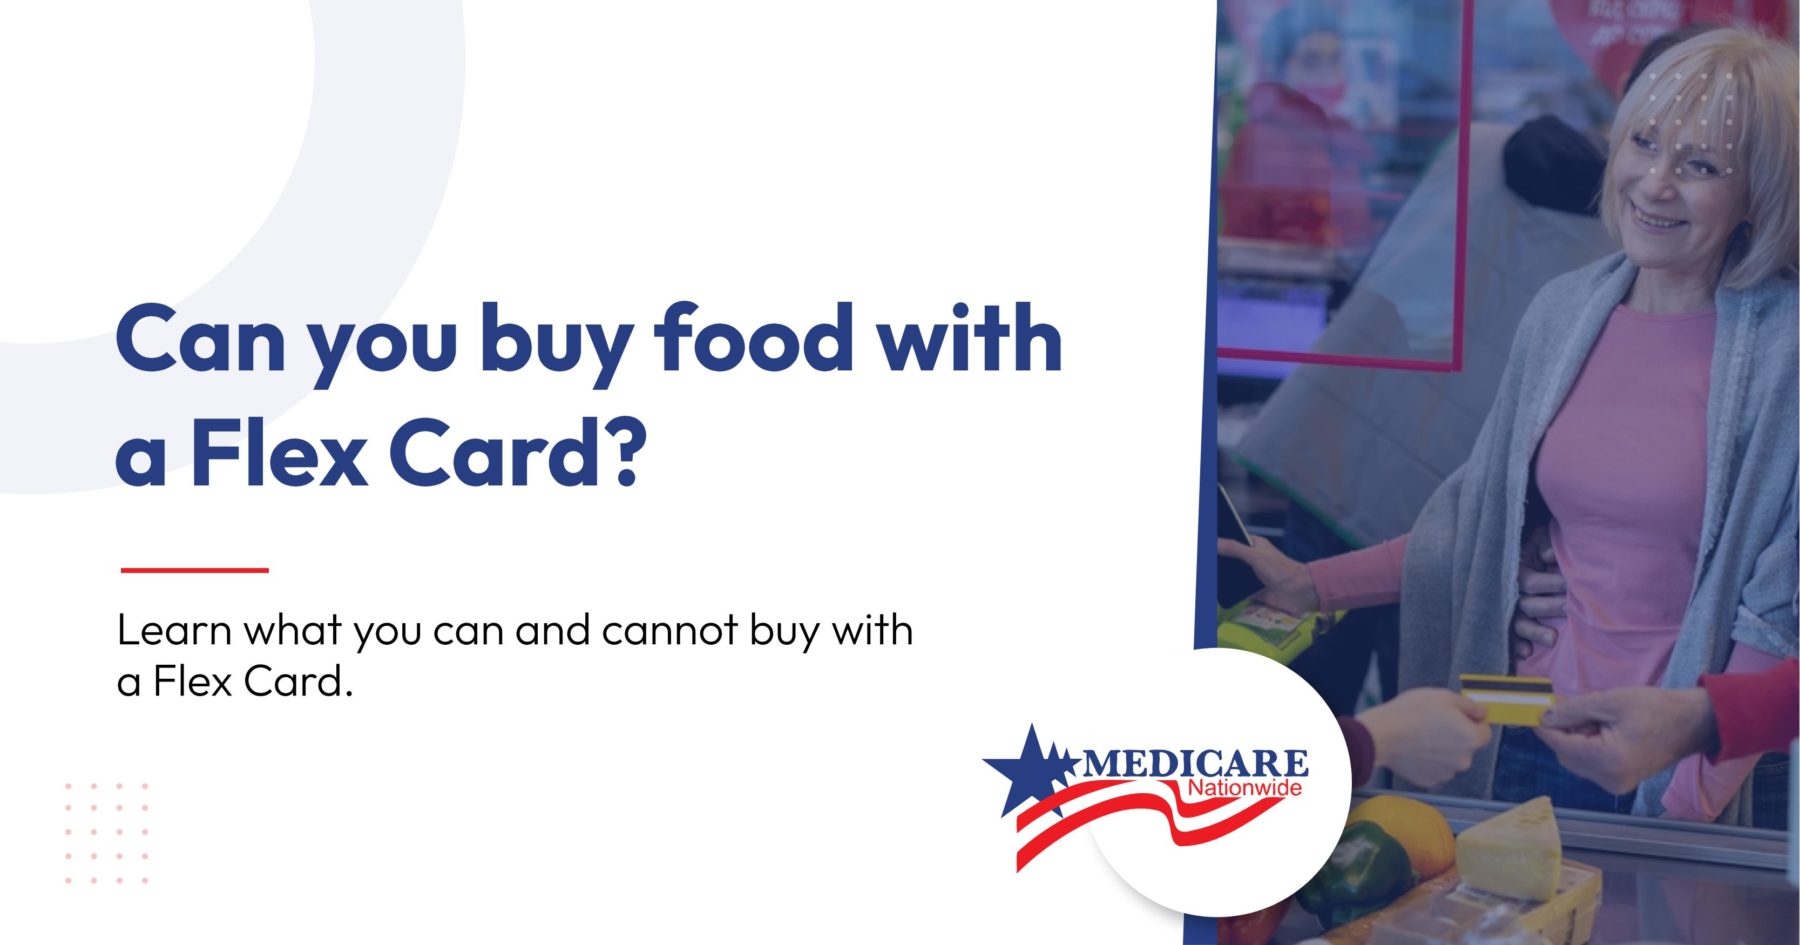 Can you buy food with a Flex Card